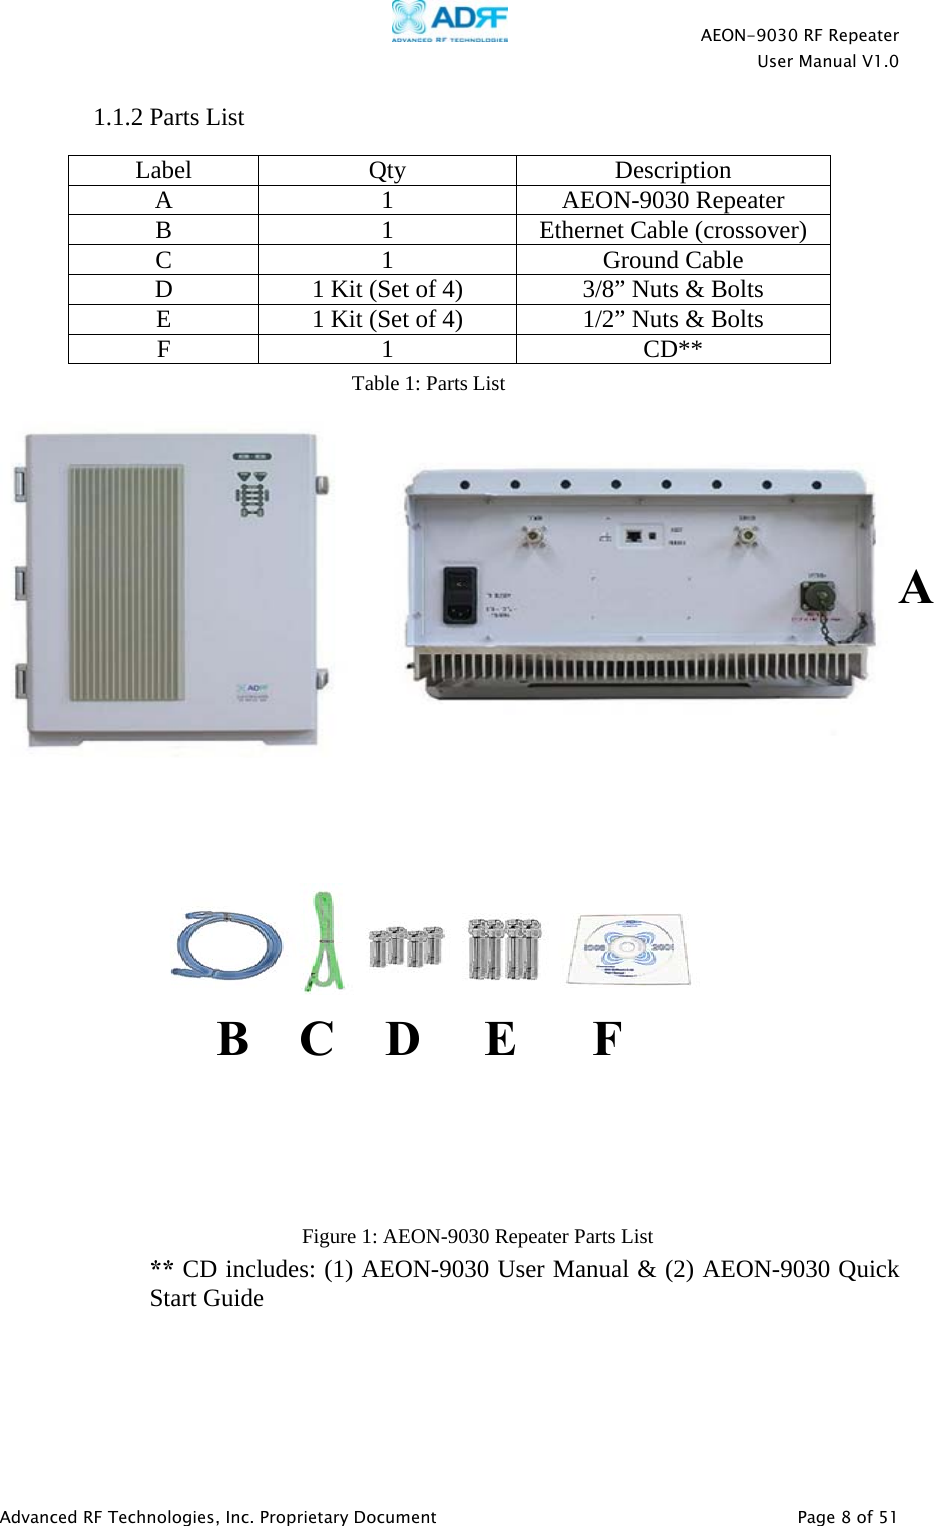    AEON-9030 RF Repeater  User Manual V1.0  Advanced RF Technologies, Inc. Proprietary Document   Page 8 of 51  1.1.2 Parts List   Label Qty  Description A 1 AEON-9030 Repeater B  1  Ethernet Cable (crossover) C 1 Ground Cable D  1 Kit (Set of 4)  3/8” Nuts &amp; Bolts E  1 Kit (Set of 4)  1/2” Nuts &amp; Bolts F 1  CD**                 ** CD includes: (1) AEON-9030 User Manual &amp; (2) AEON-9030 Quick Start Guide Figure 1: AEON-9030 Repeater Parts List Table 1: Parts List       B    C    D     E      FA